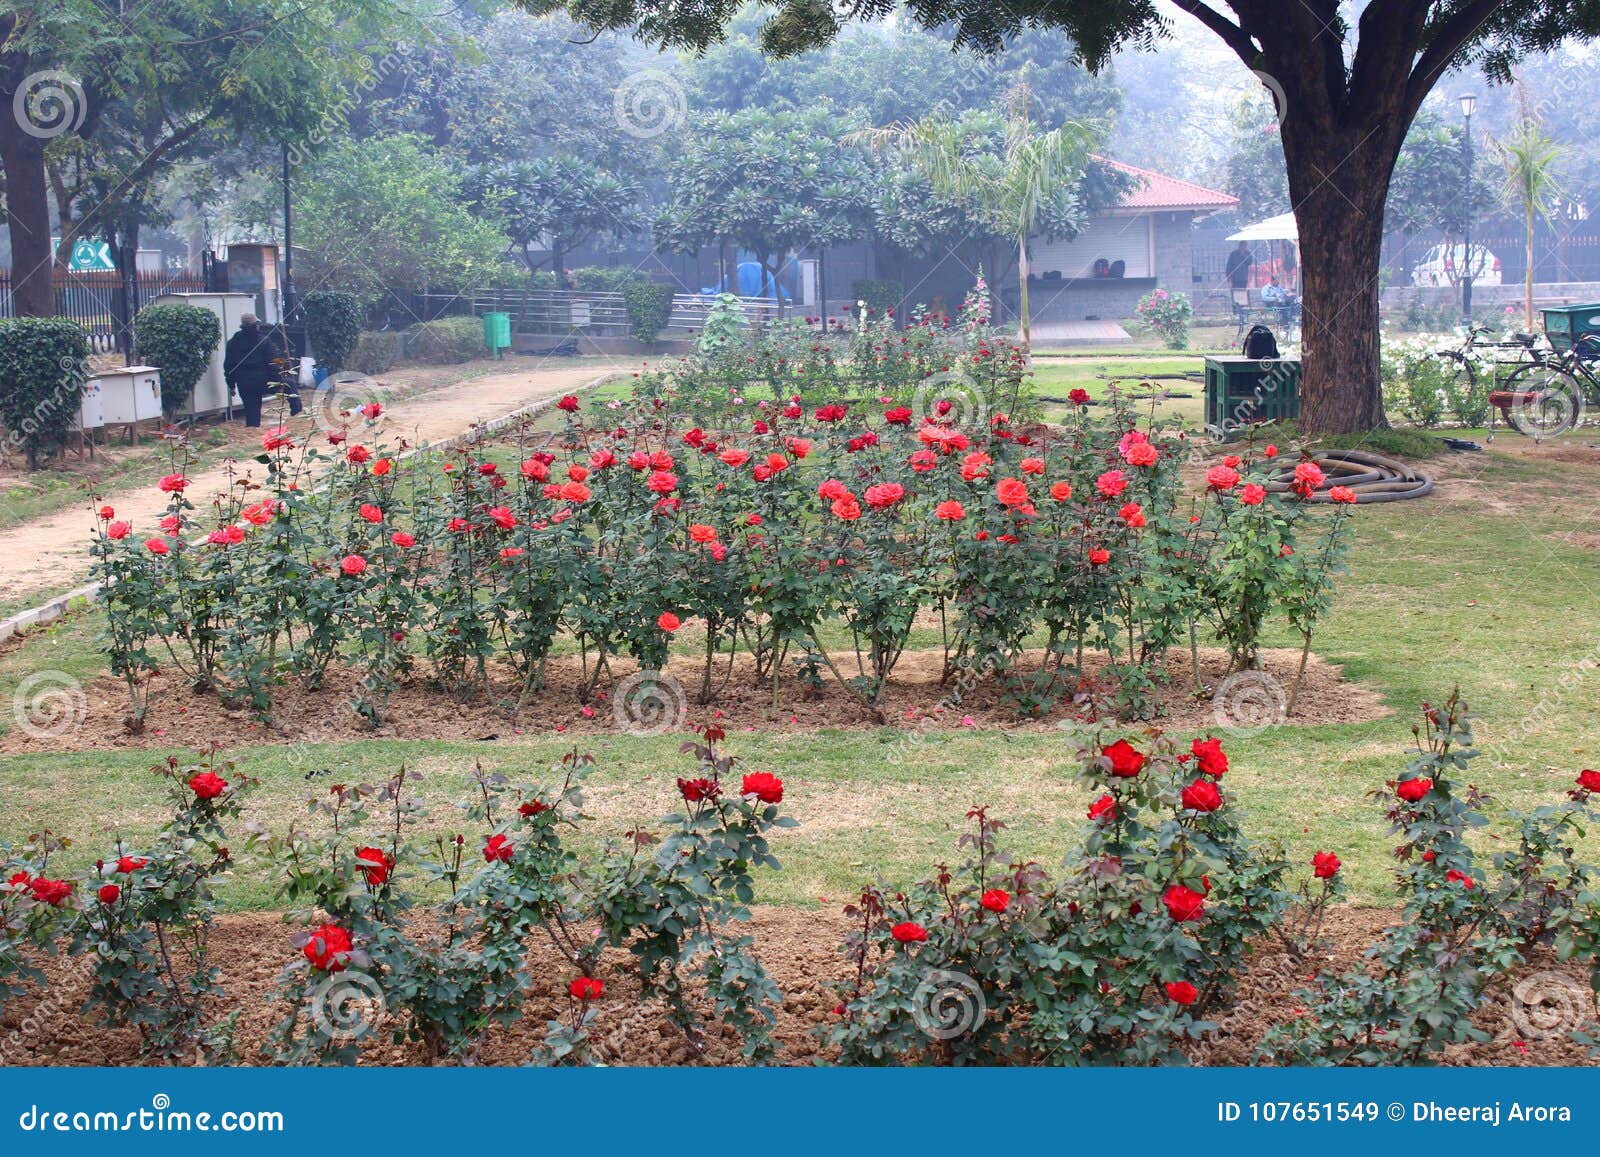 colorful roses in national rose garden, new delhi, india editorial